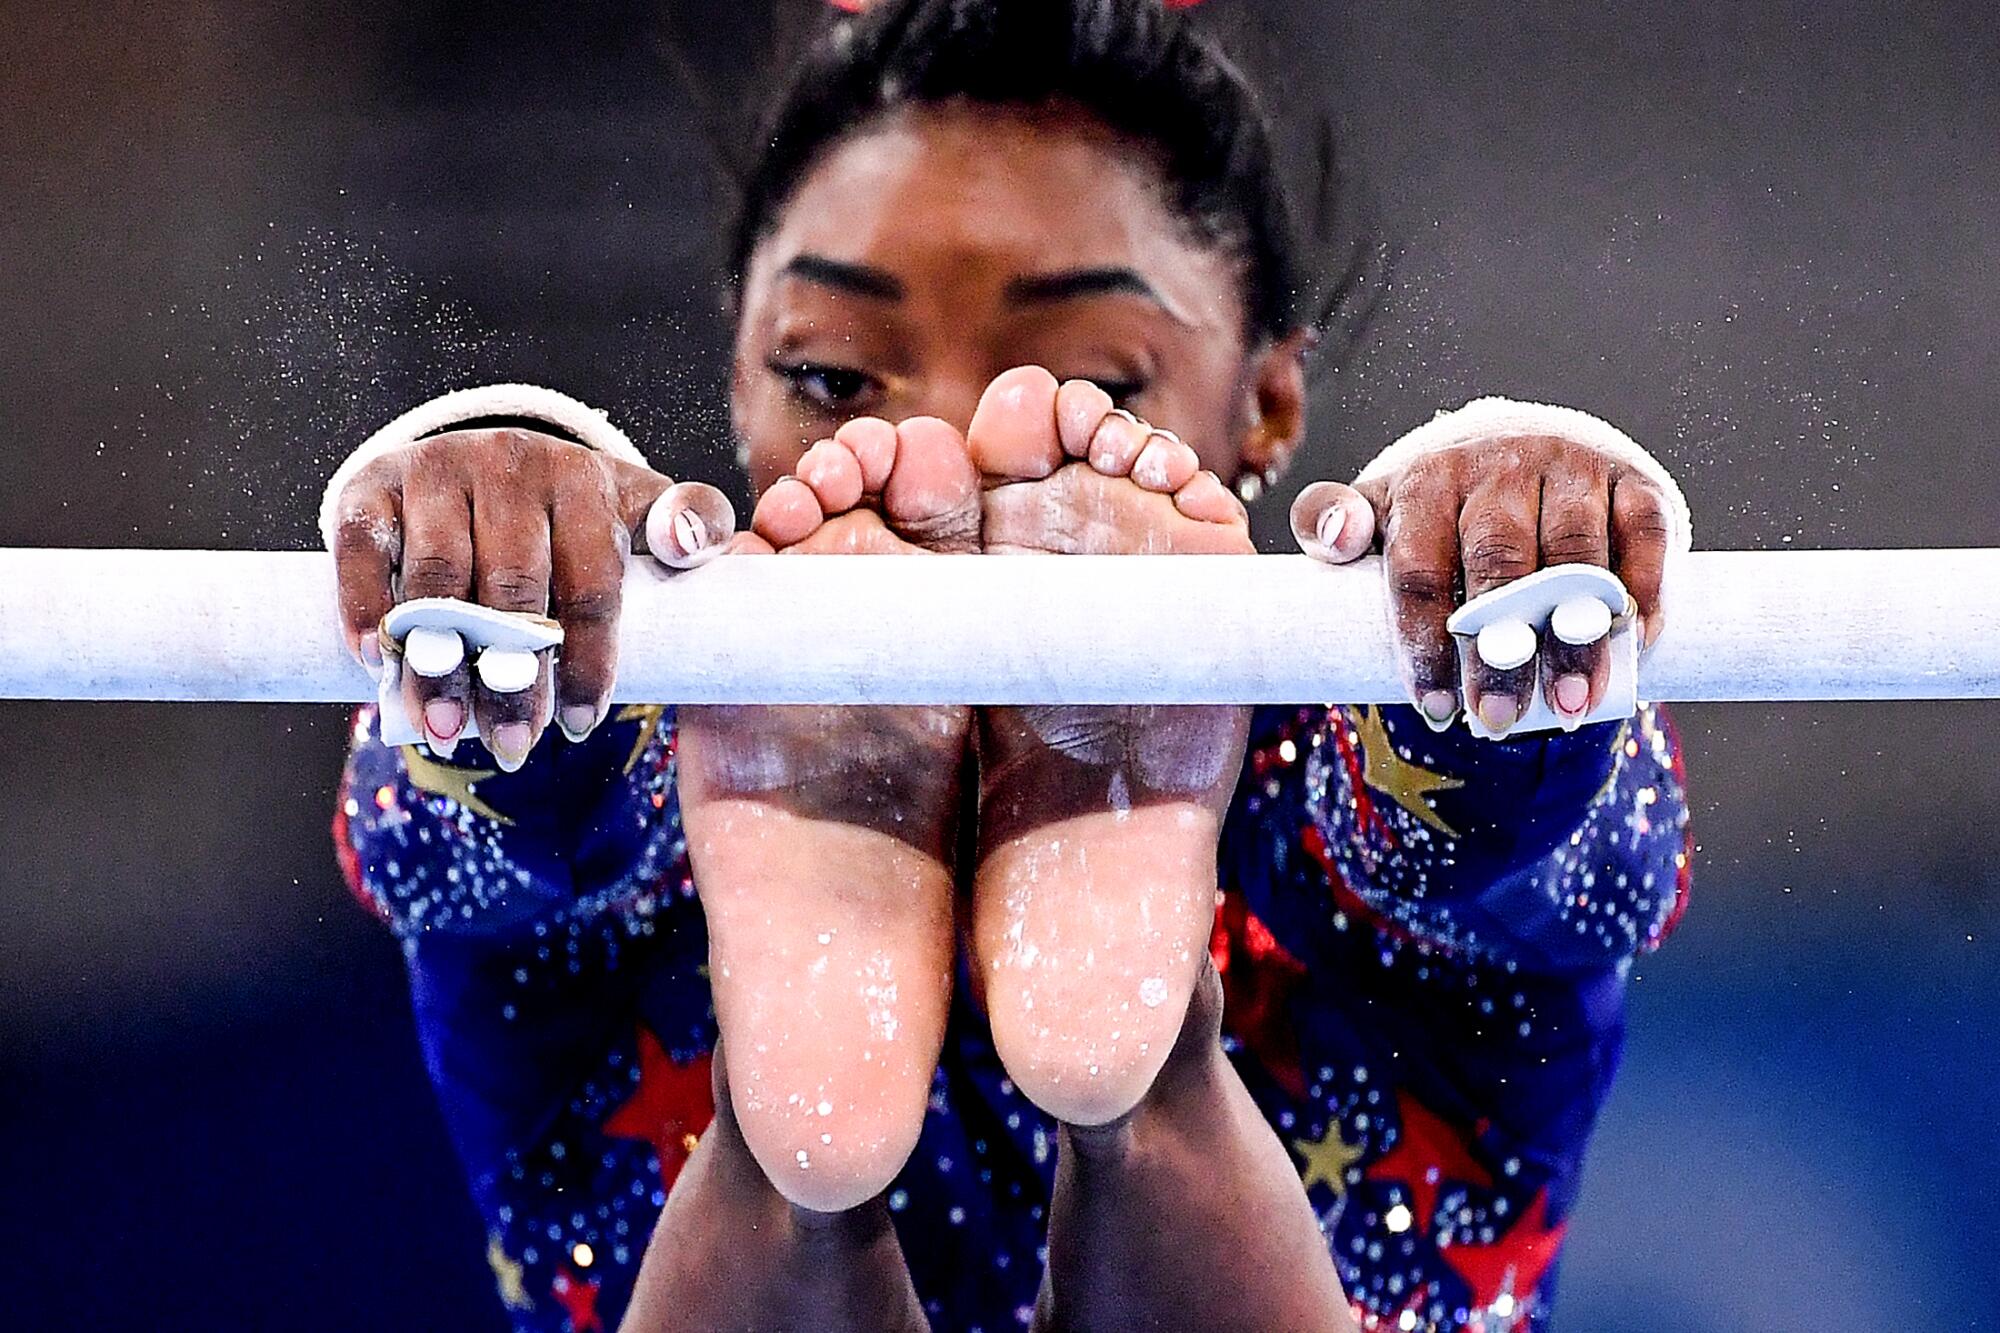 Simone Biles competes on the uneven bars at the Tokyo Olympics.